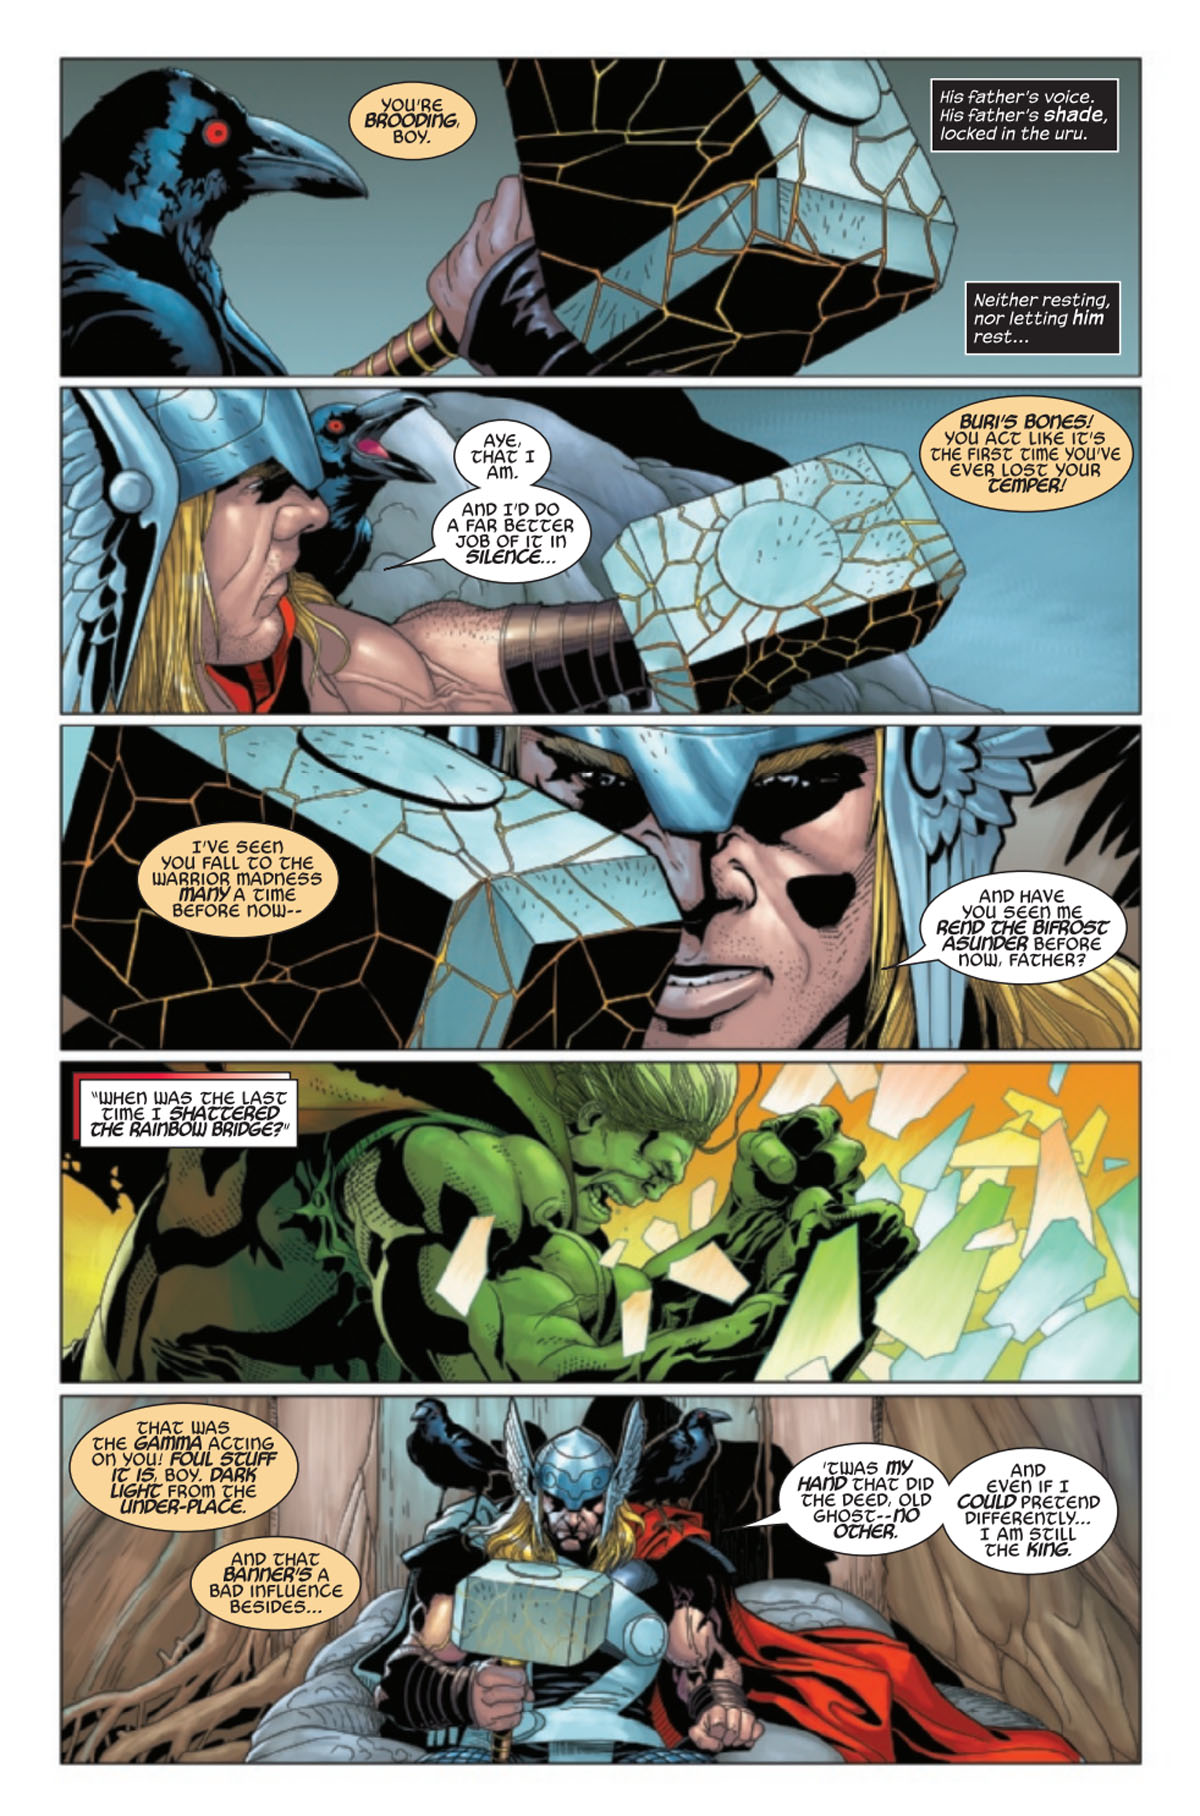 Thor #27 page 2